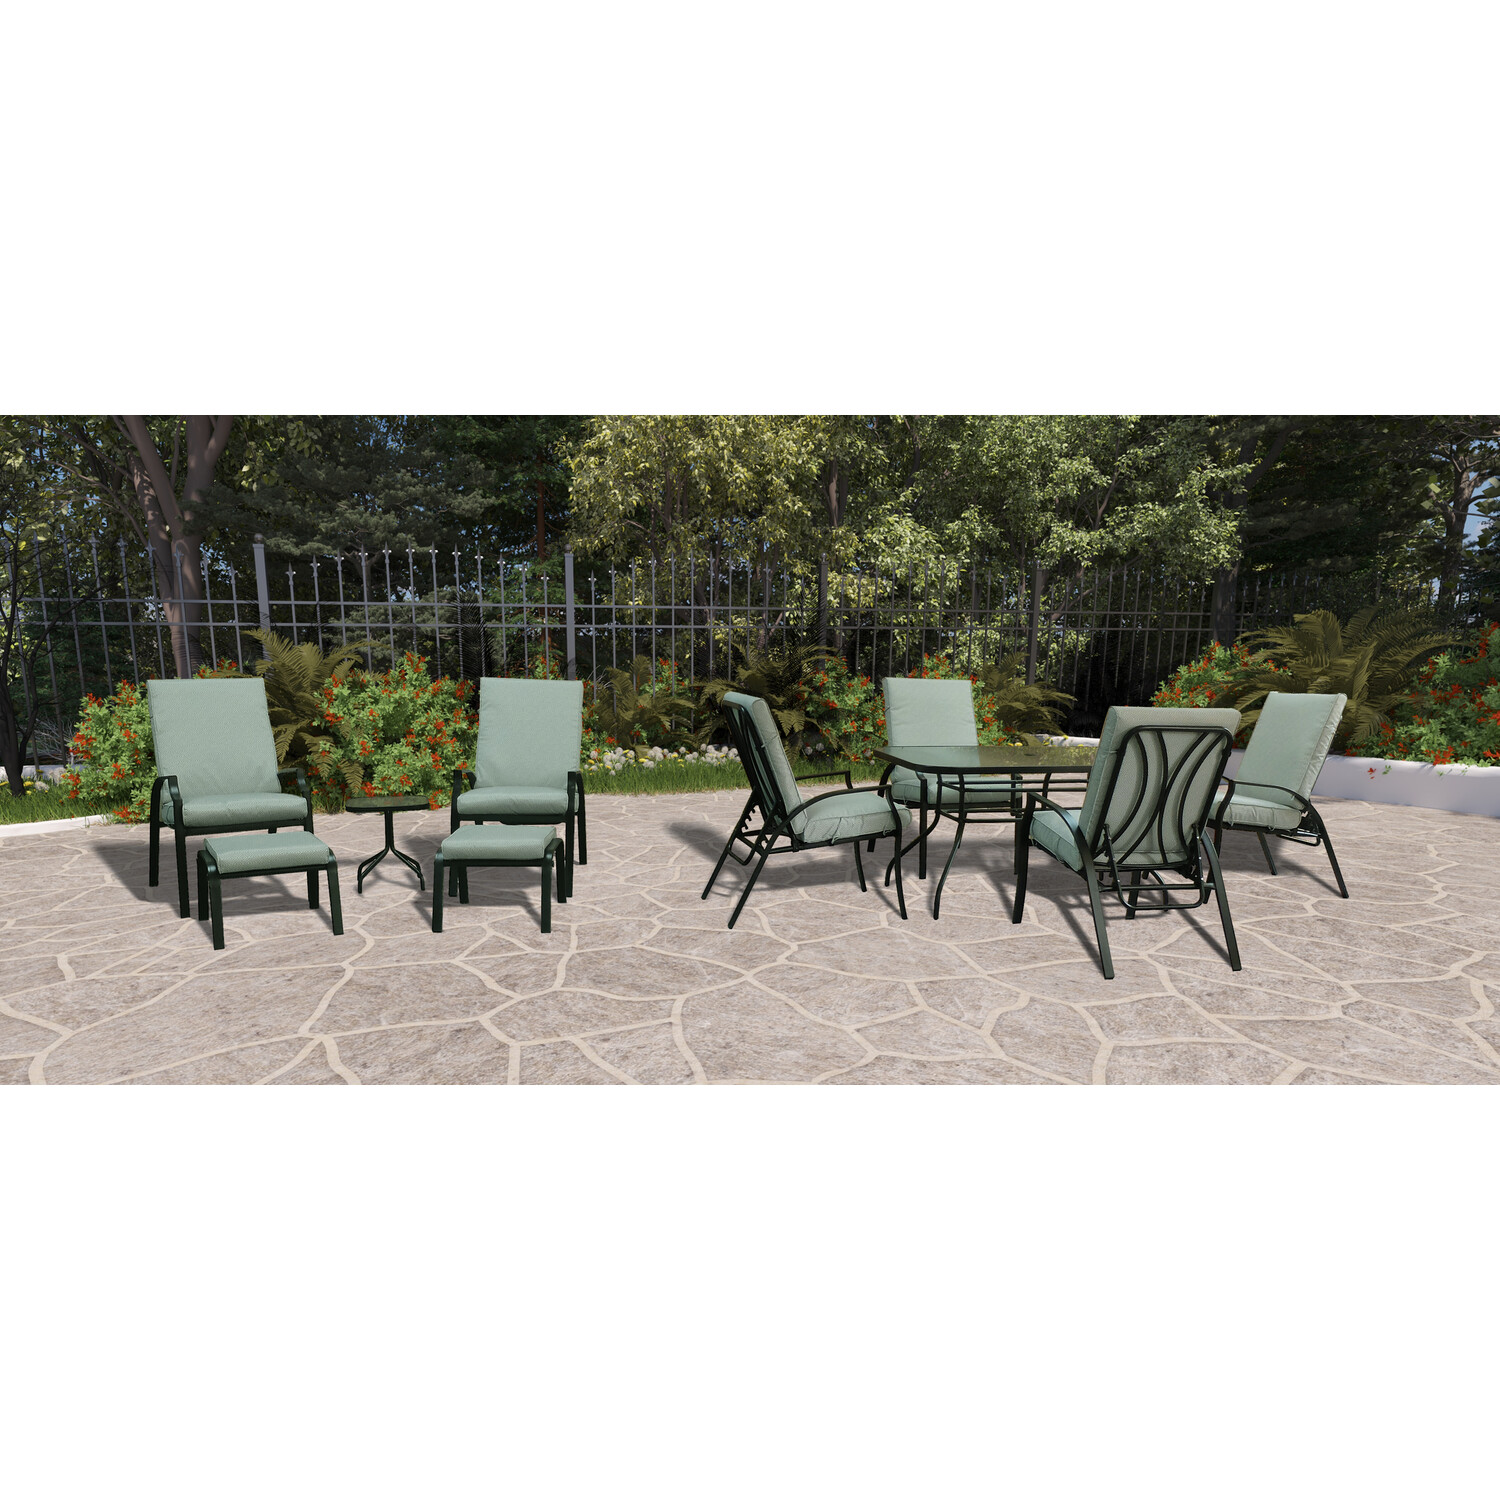 Malay Riviera Polyester Steel 6 Seater Recliner Dining Set Sage Image 2